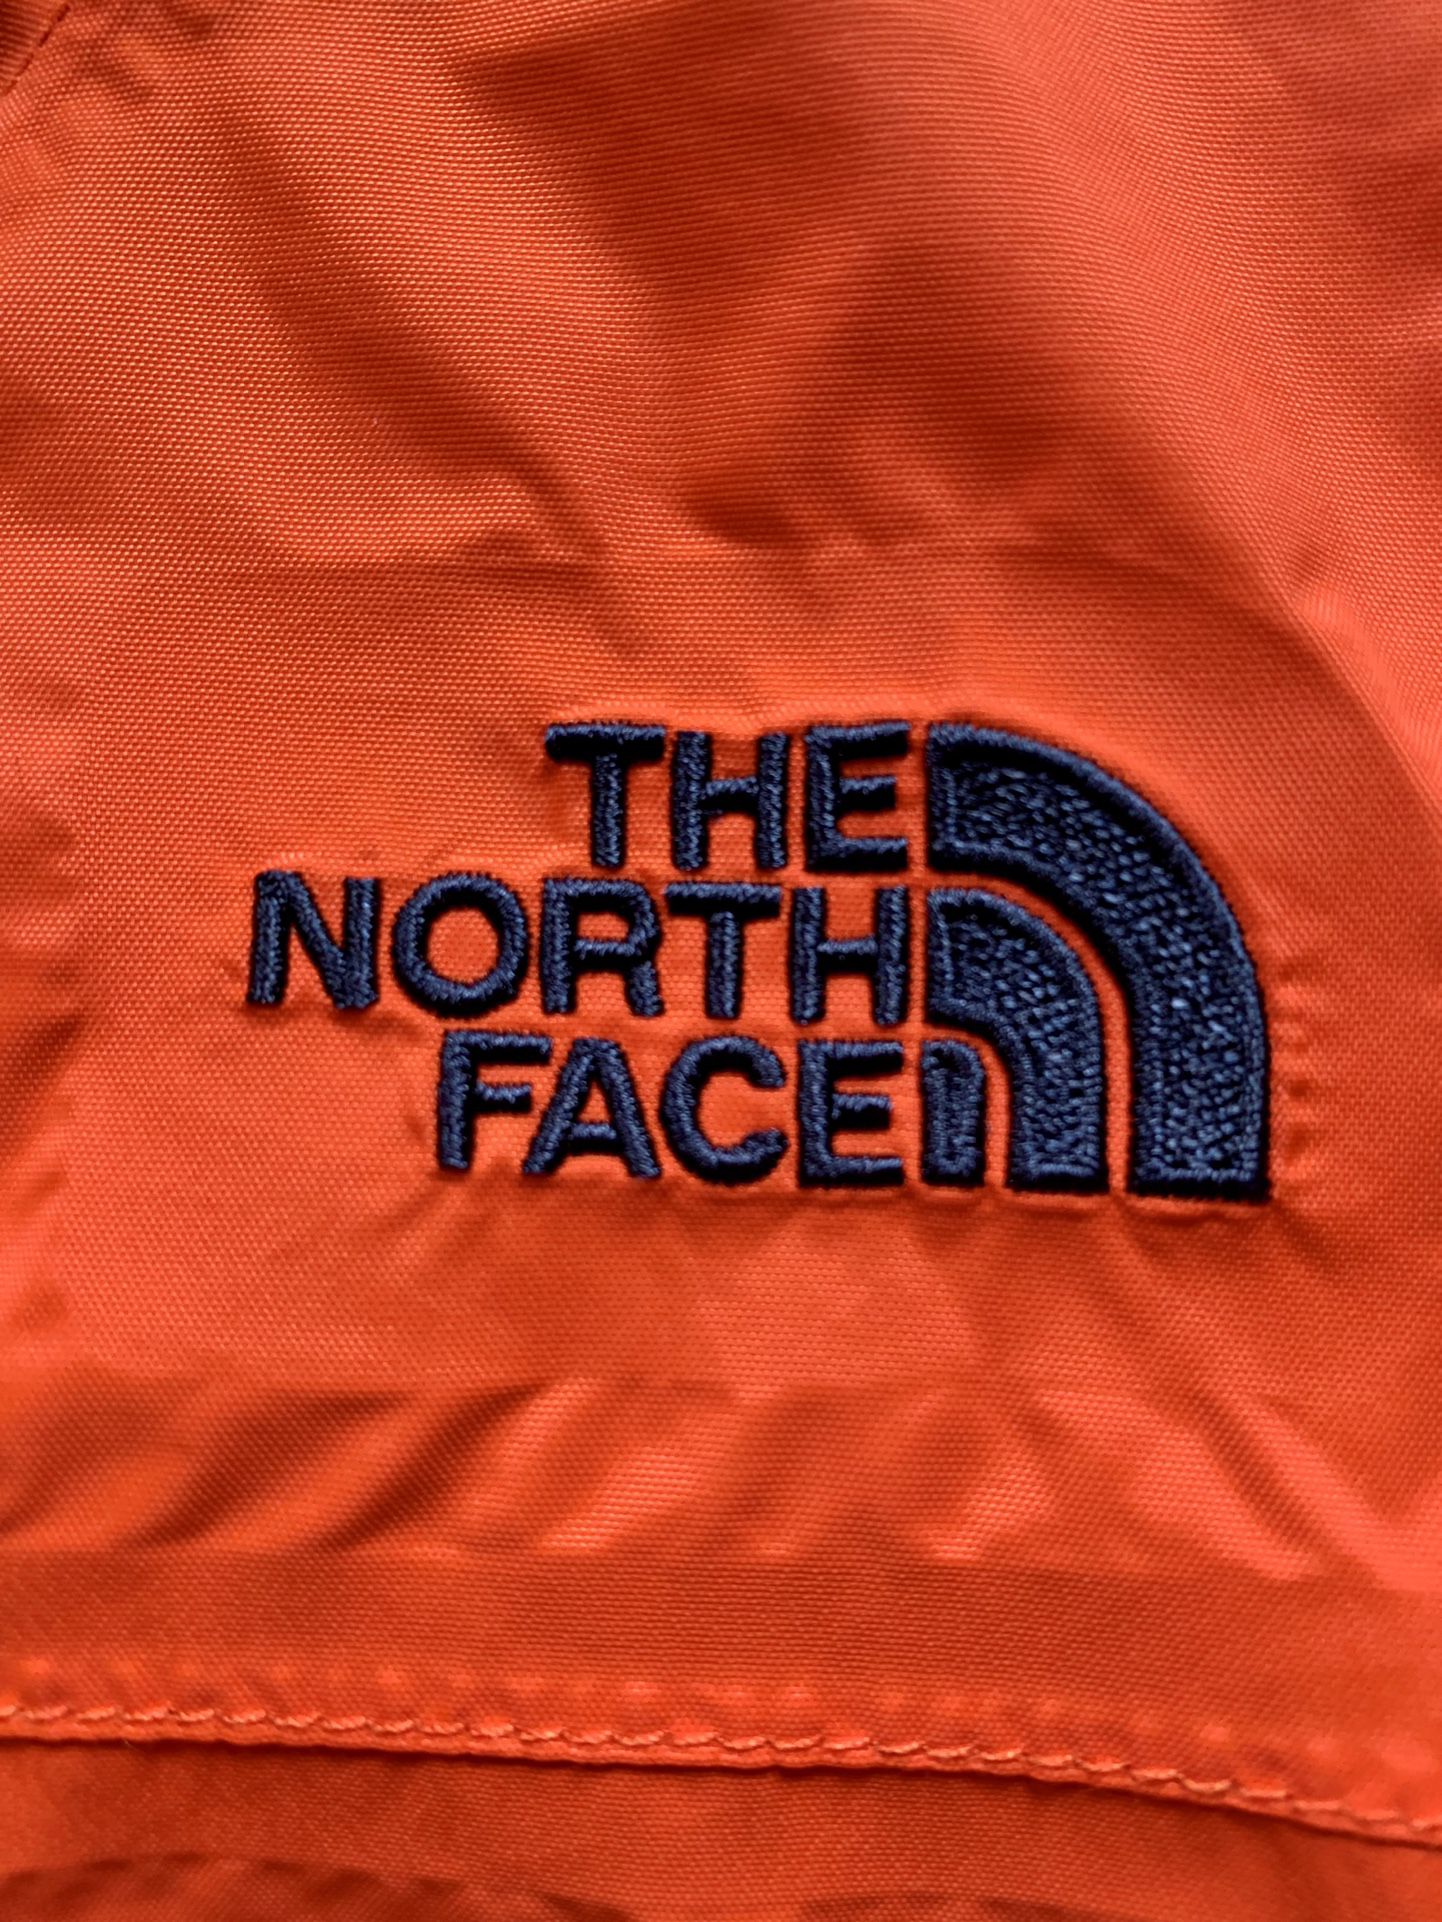 Amazing Condition Unisex North Face Youth Jacket X Small Size 5/6